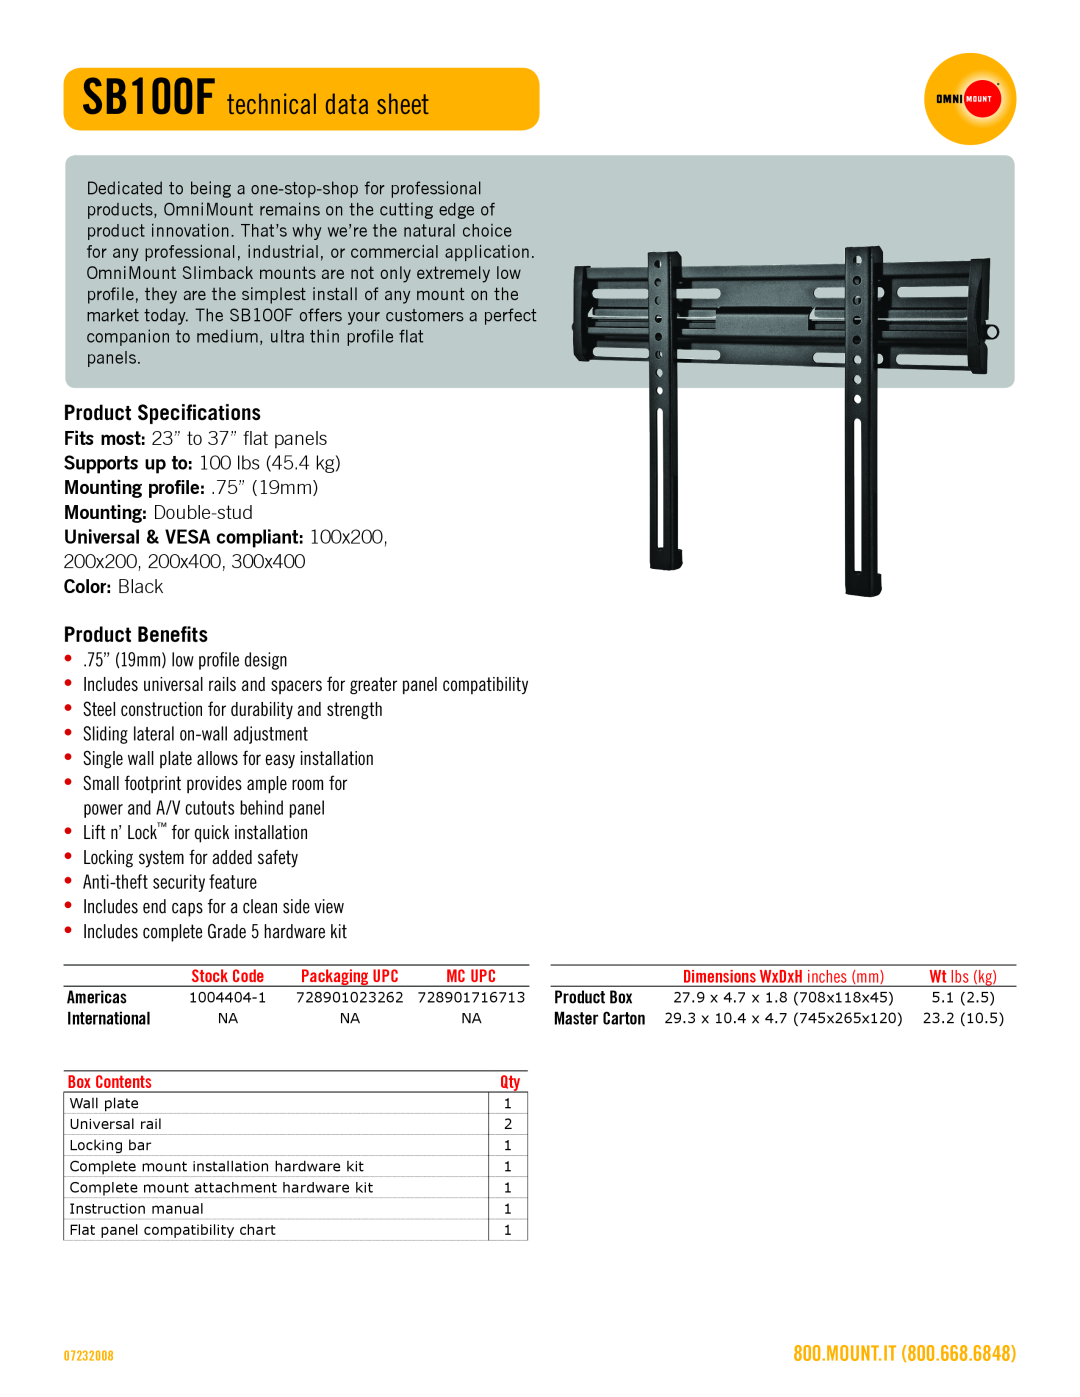 Omnimount manual SB100F technical data sheet, Product Specifications, Product Benefits, Mounting profile .75” 19mm 